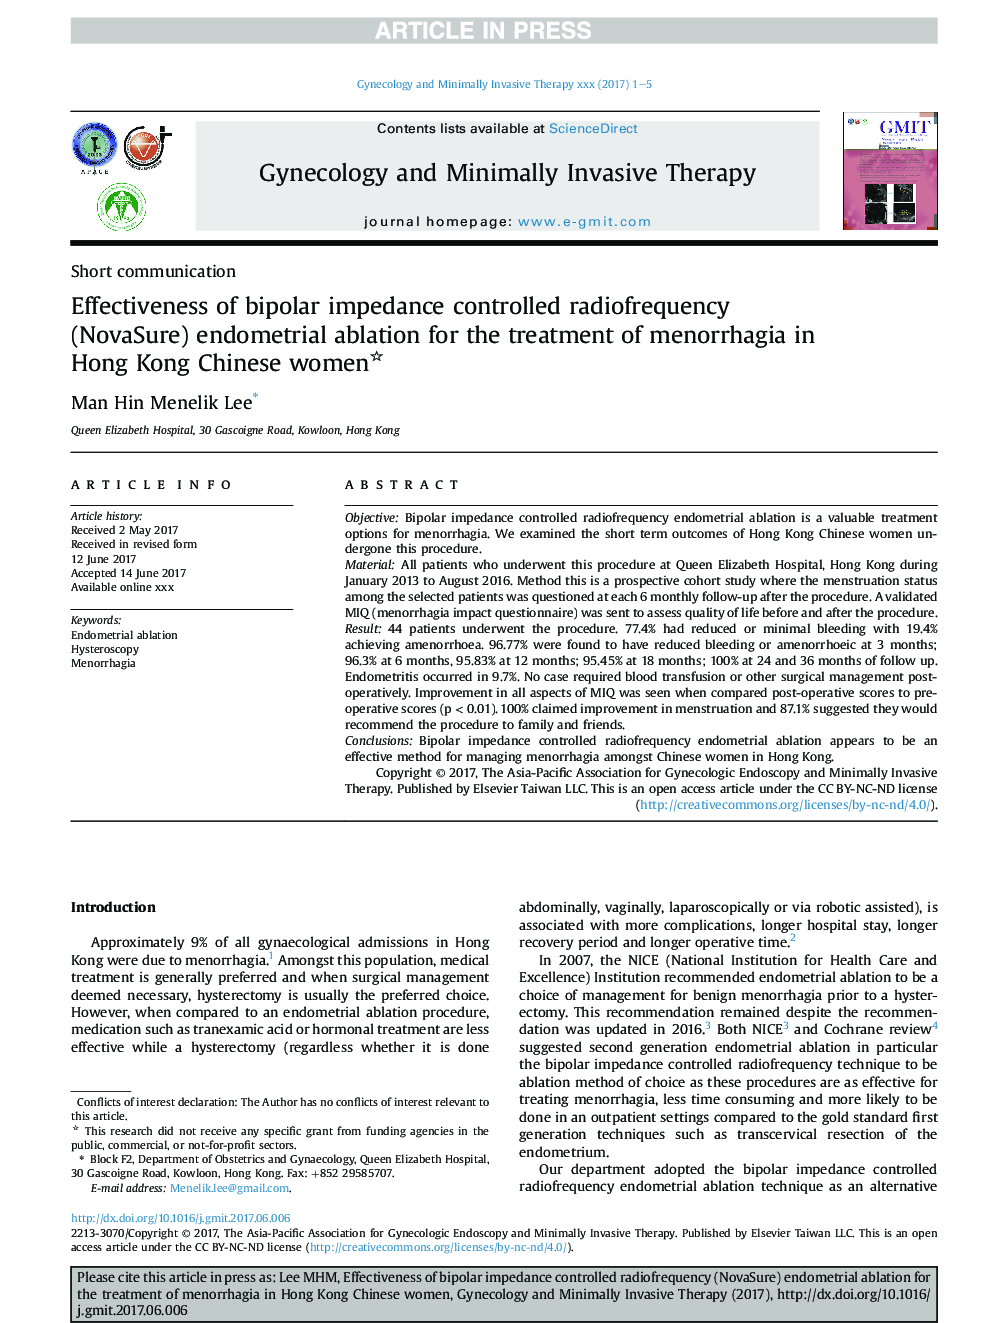 Effectiveness of bipolar impedance controlled radiofrequency (NovaSure) endometrial ablation for the treatment of menorrhagia inÂ Hong Kong Chinese women